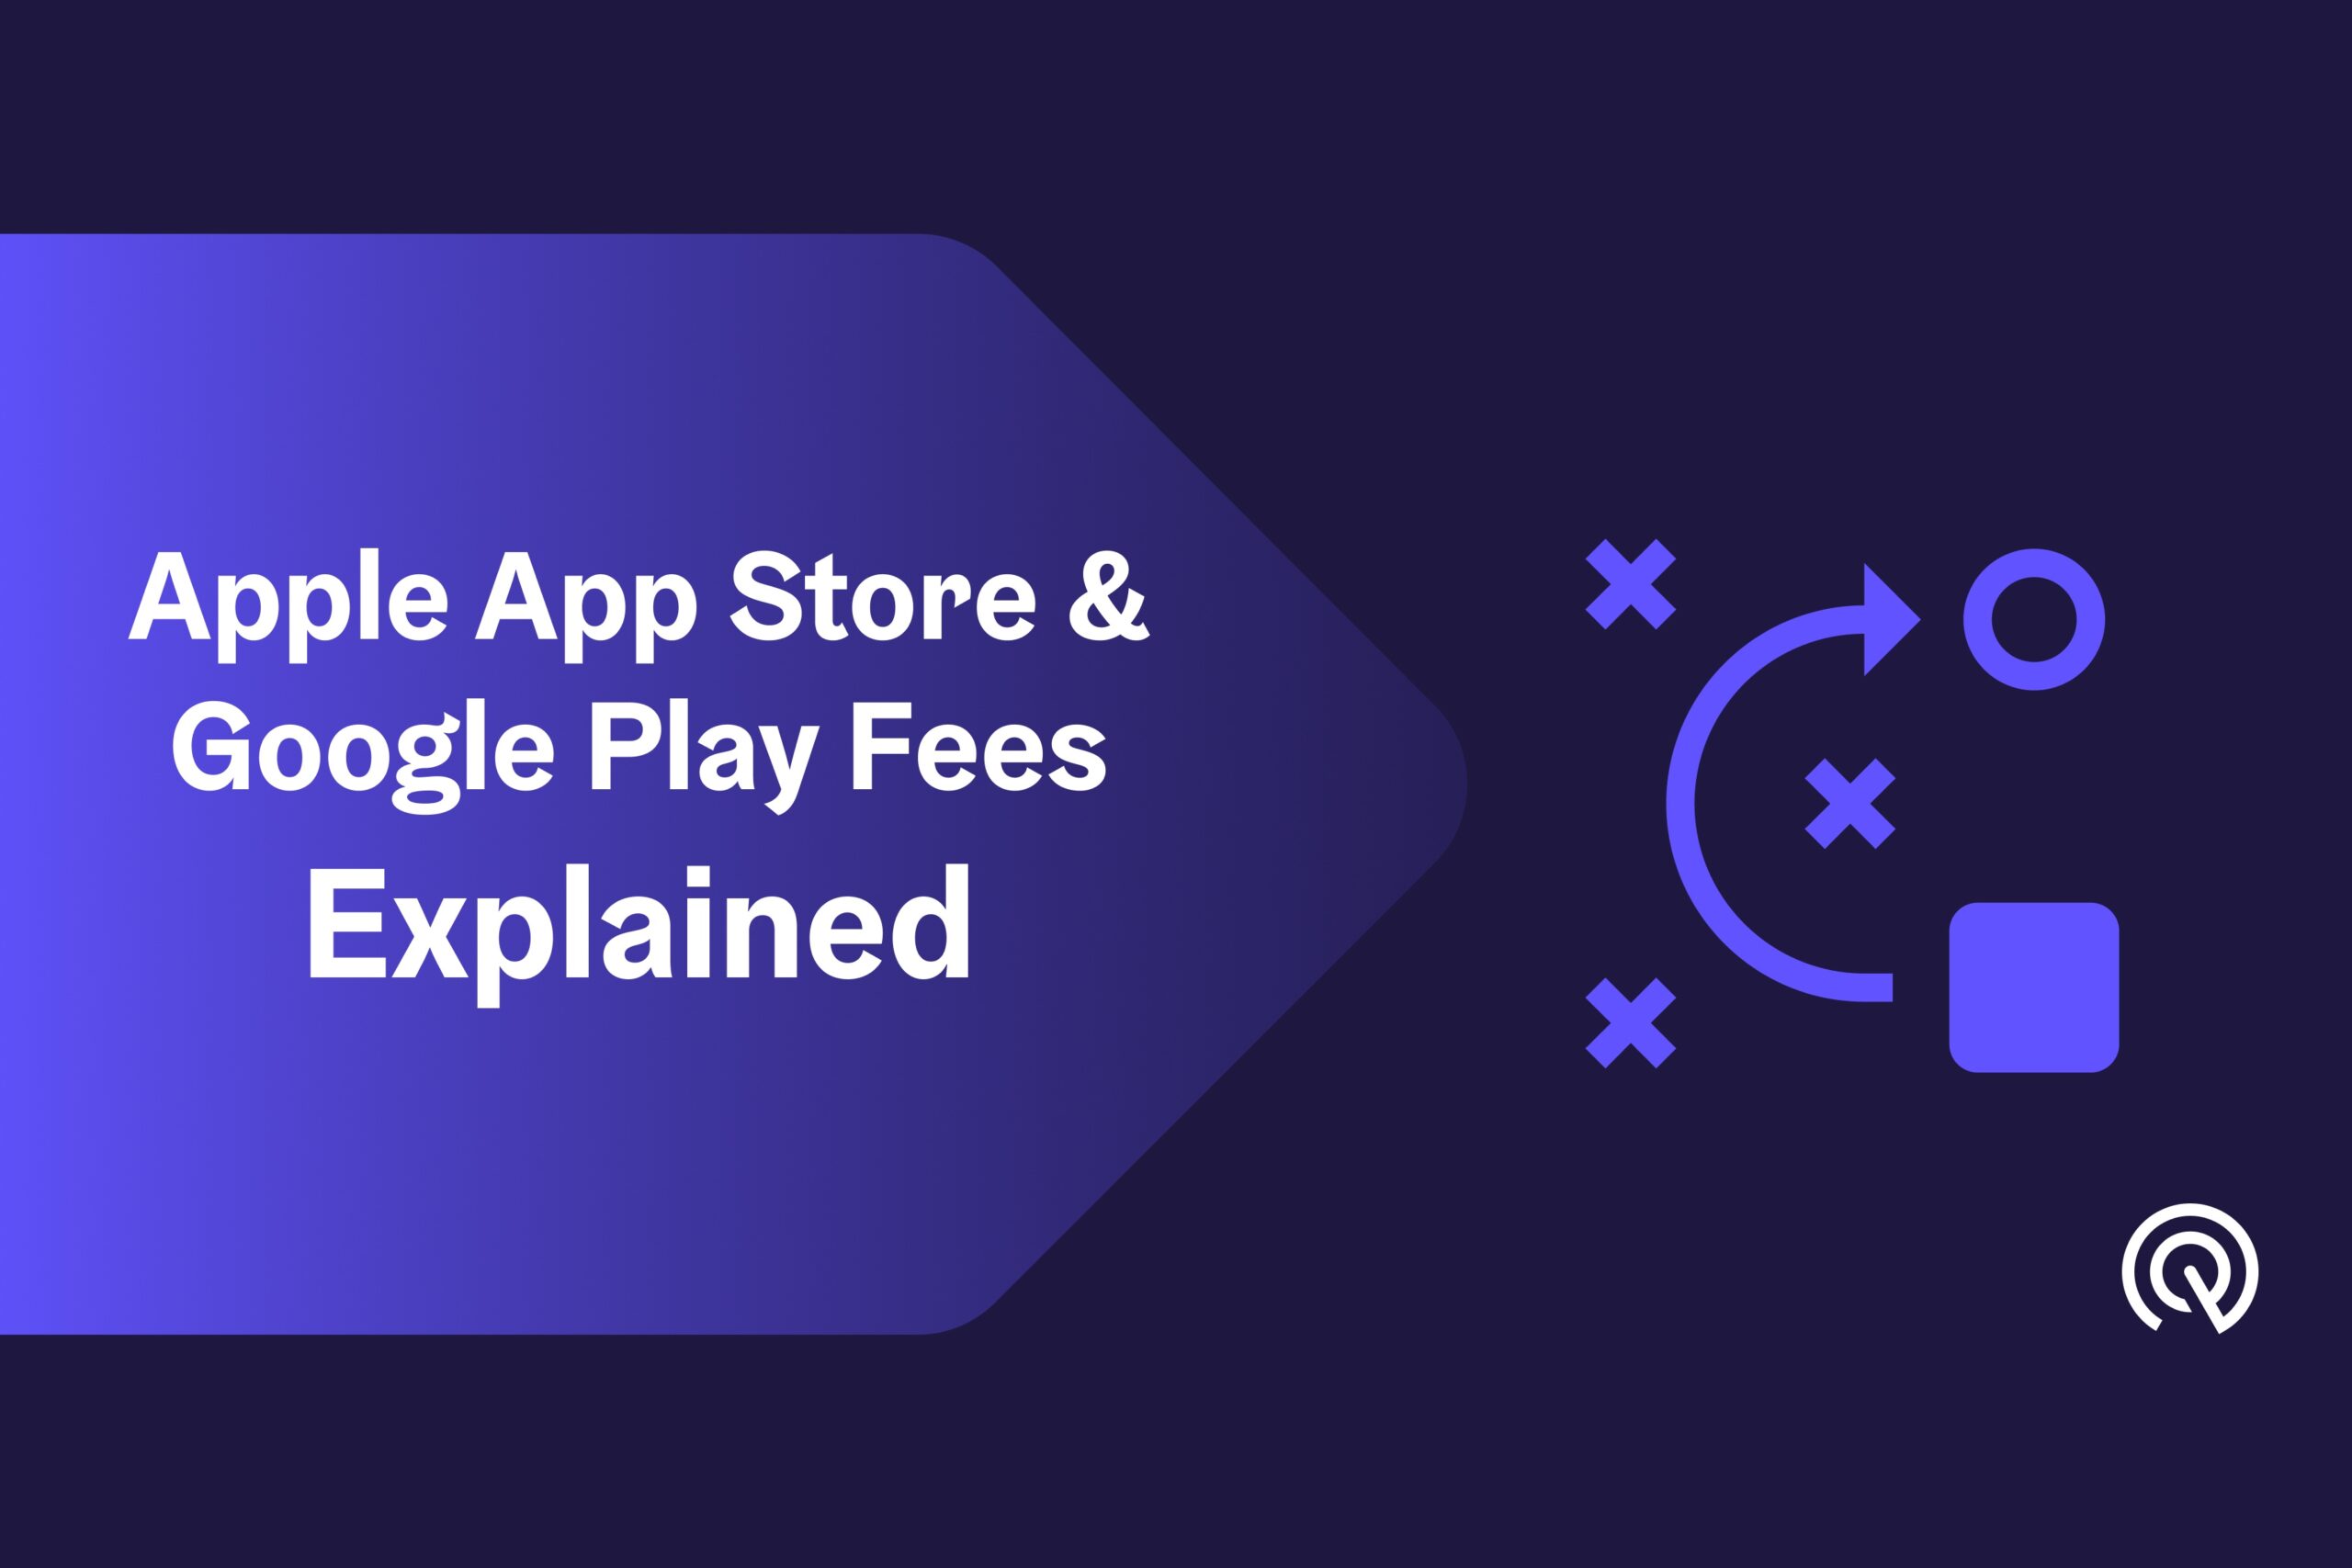 Google Play Store and Apple App Store fees, (+12 other stores)